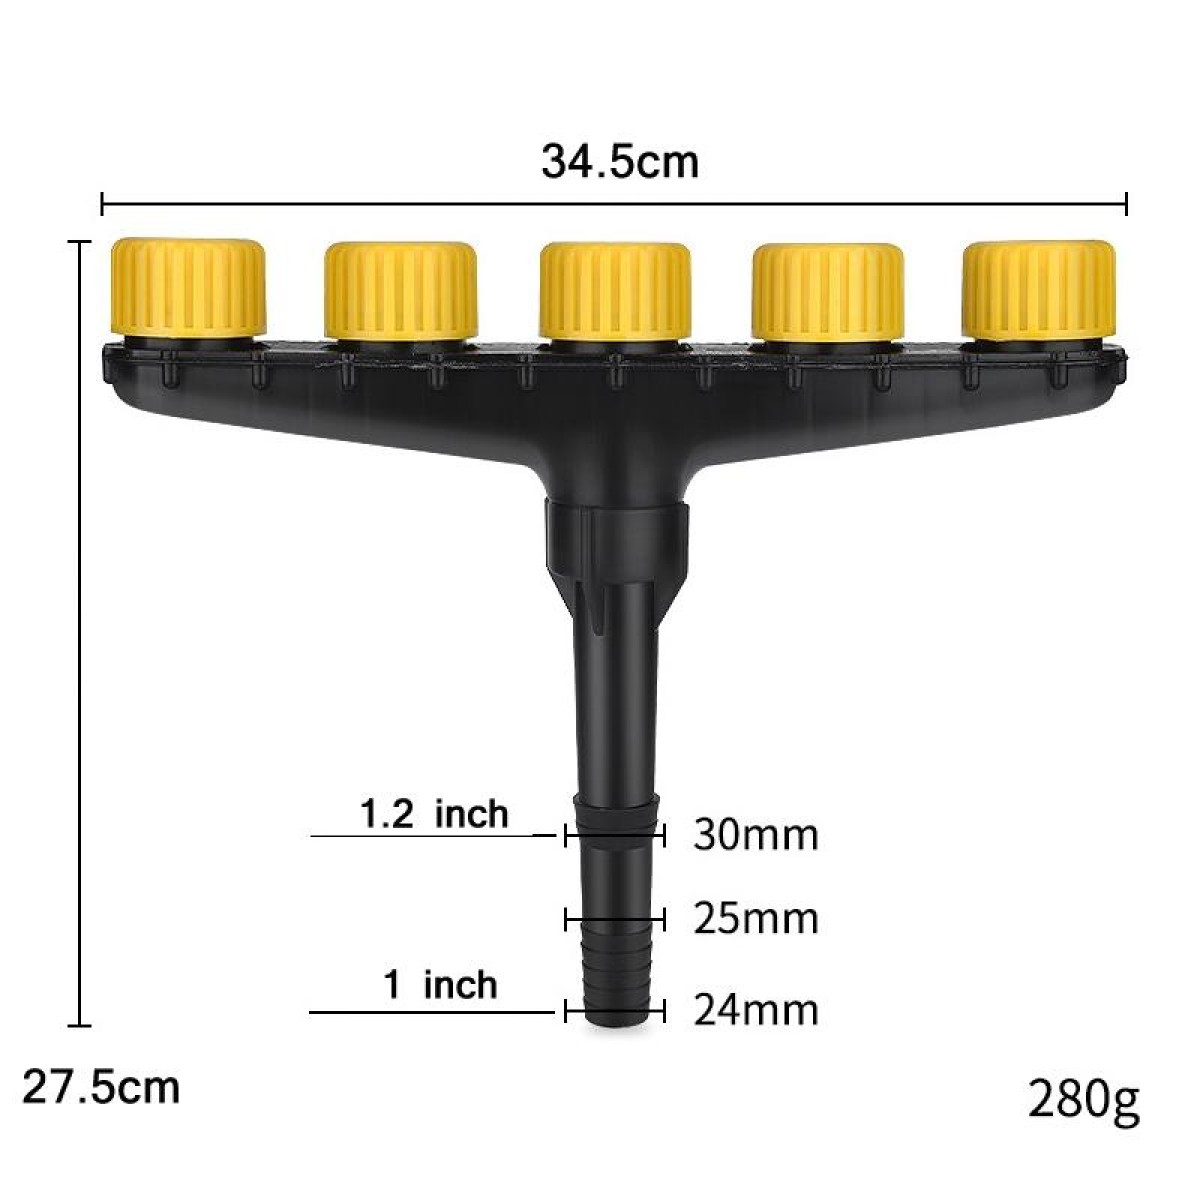 DKSSQ Gardening Watering Sprinkler Nozzle, Specification: 5 Head With 1 inch/1.2 inch Interface